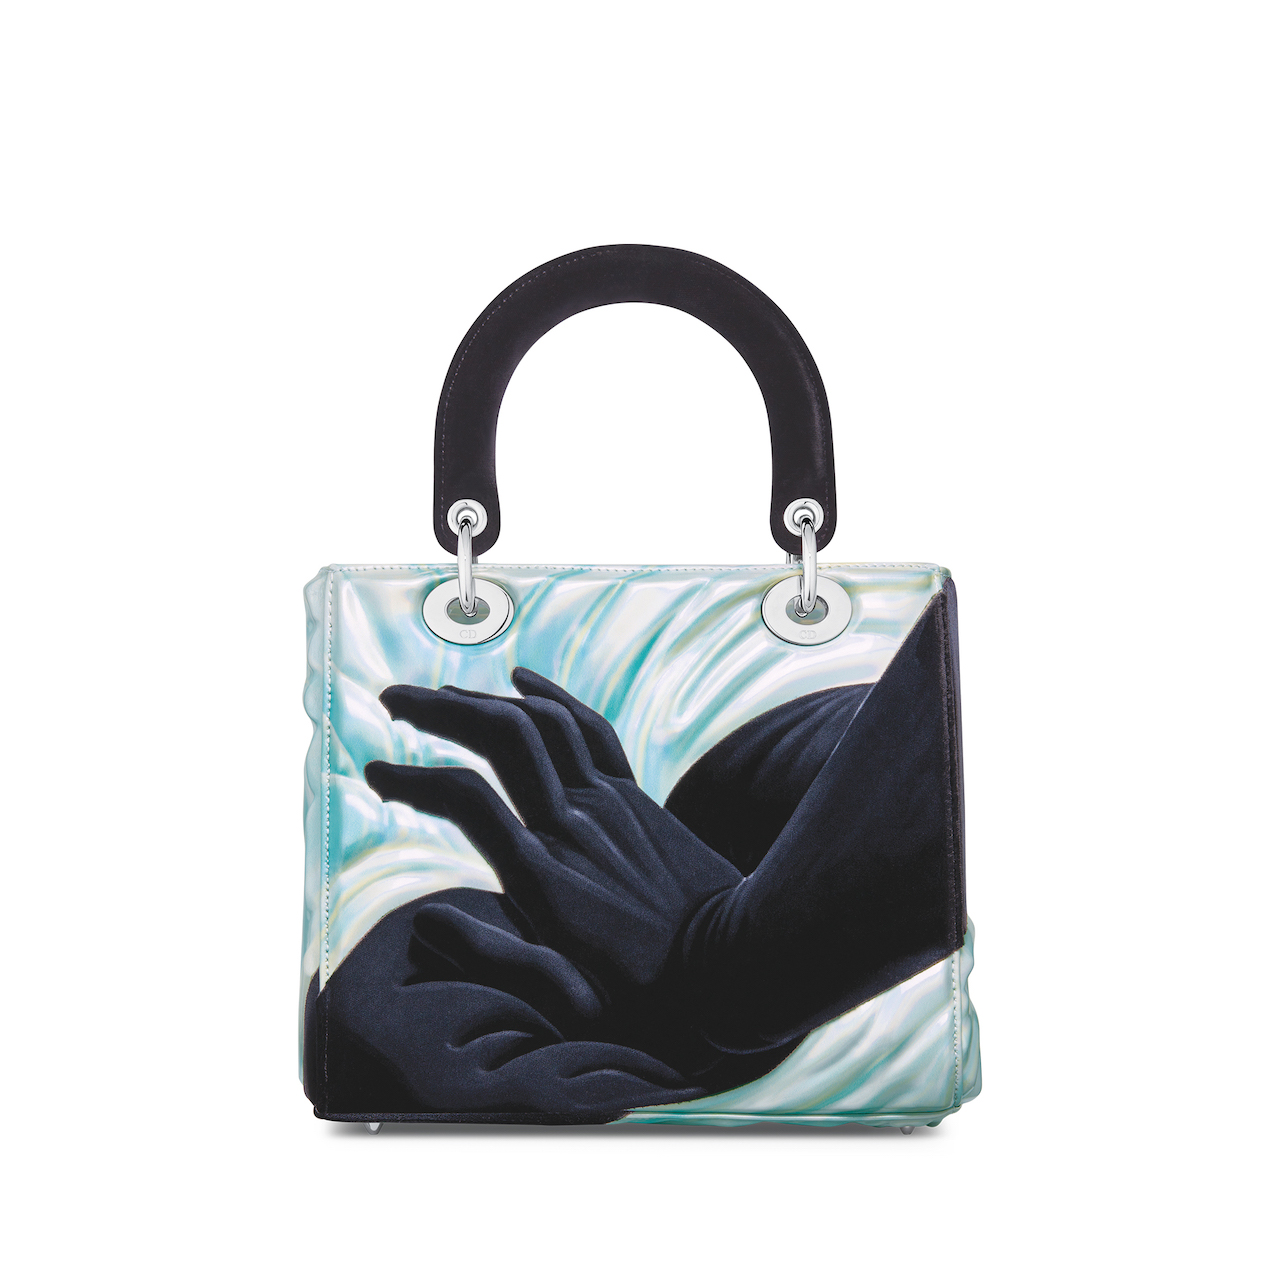 Lady Dior Bag Gets A Makeover In Sixth Edition Of Dior Lady Art Project   SHOWstudio